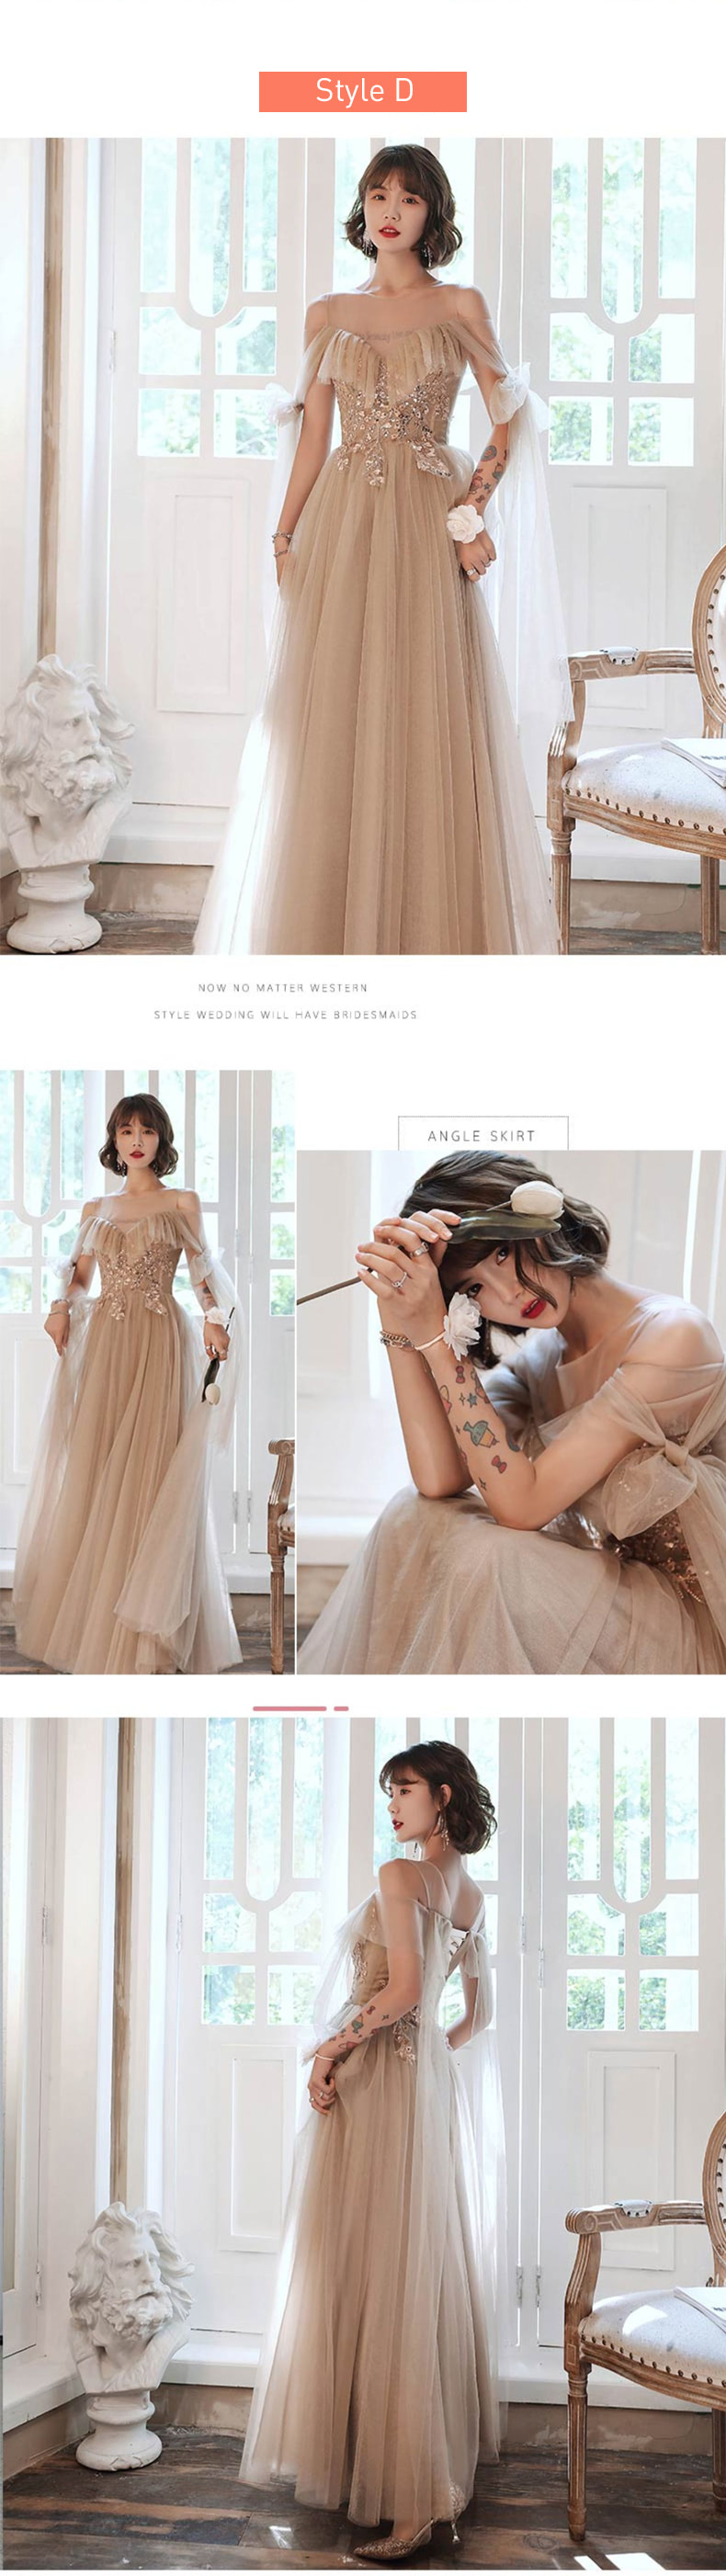 Charming-Embroidery-Ruffle-Lace-Long-Bridesmaid-Dress-Ball-Gown20.jpg